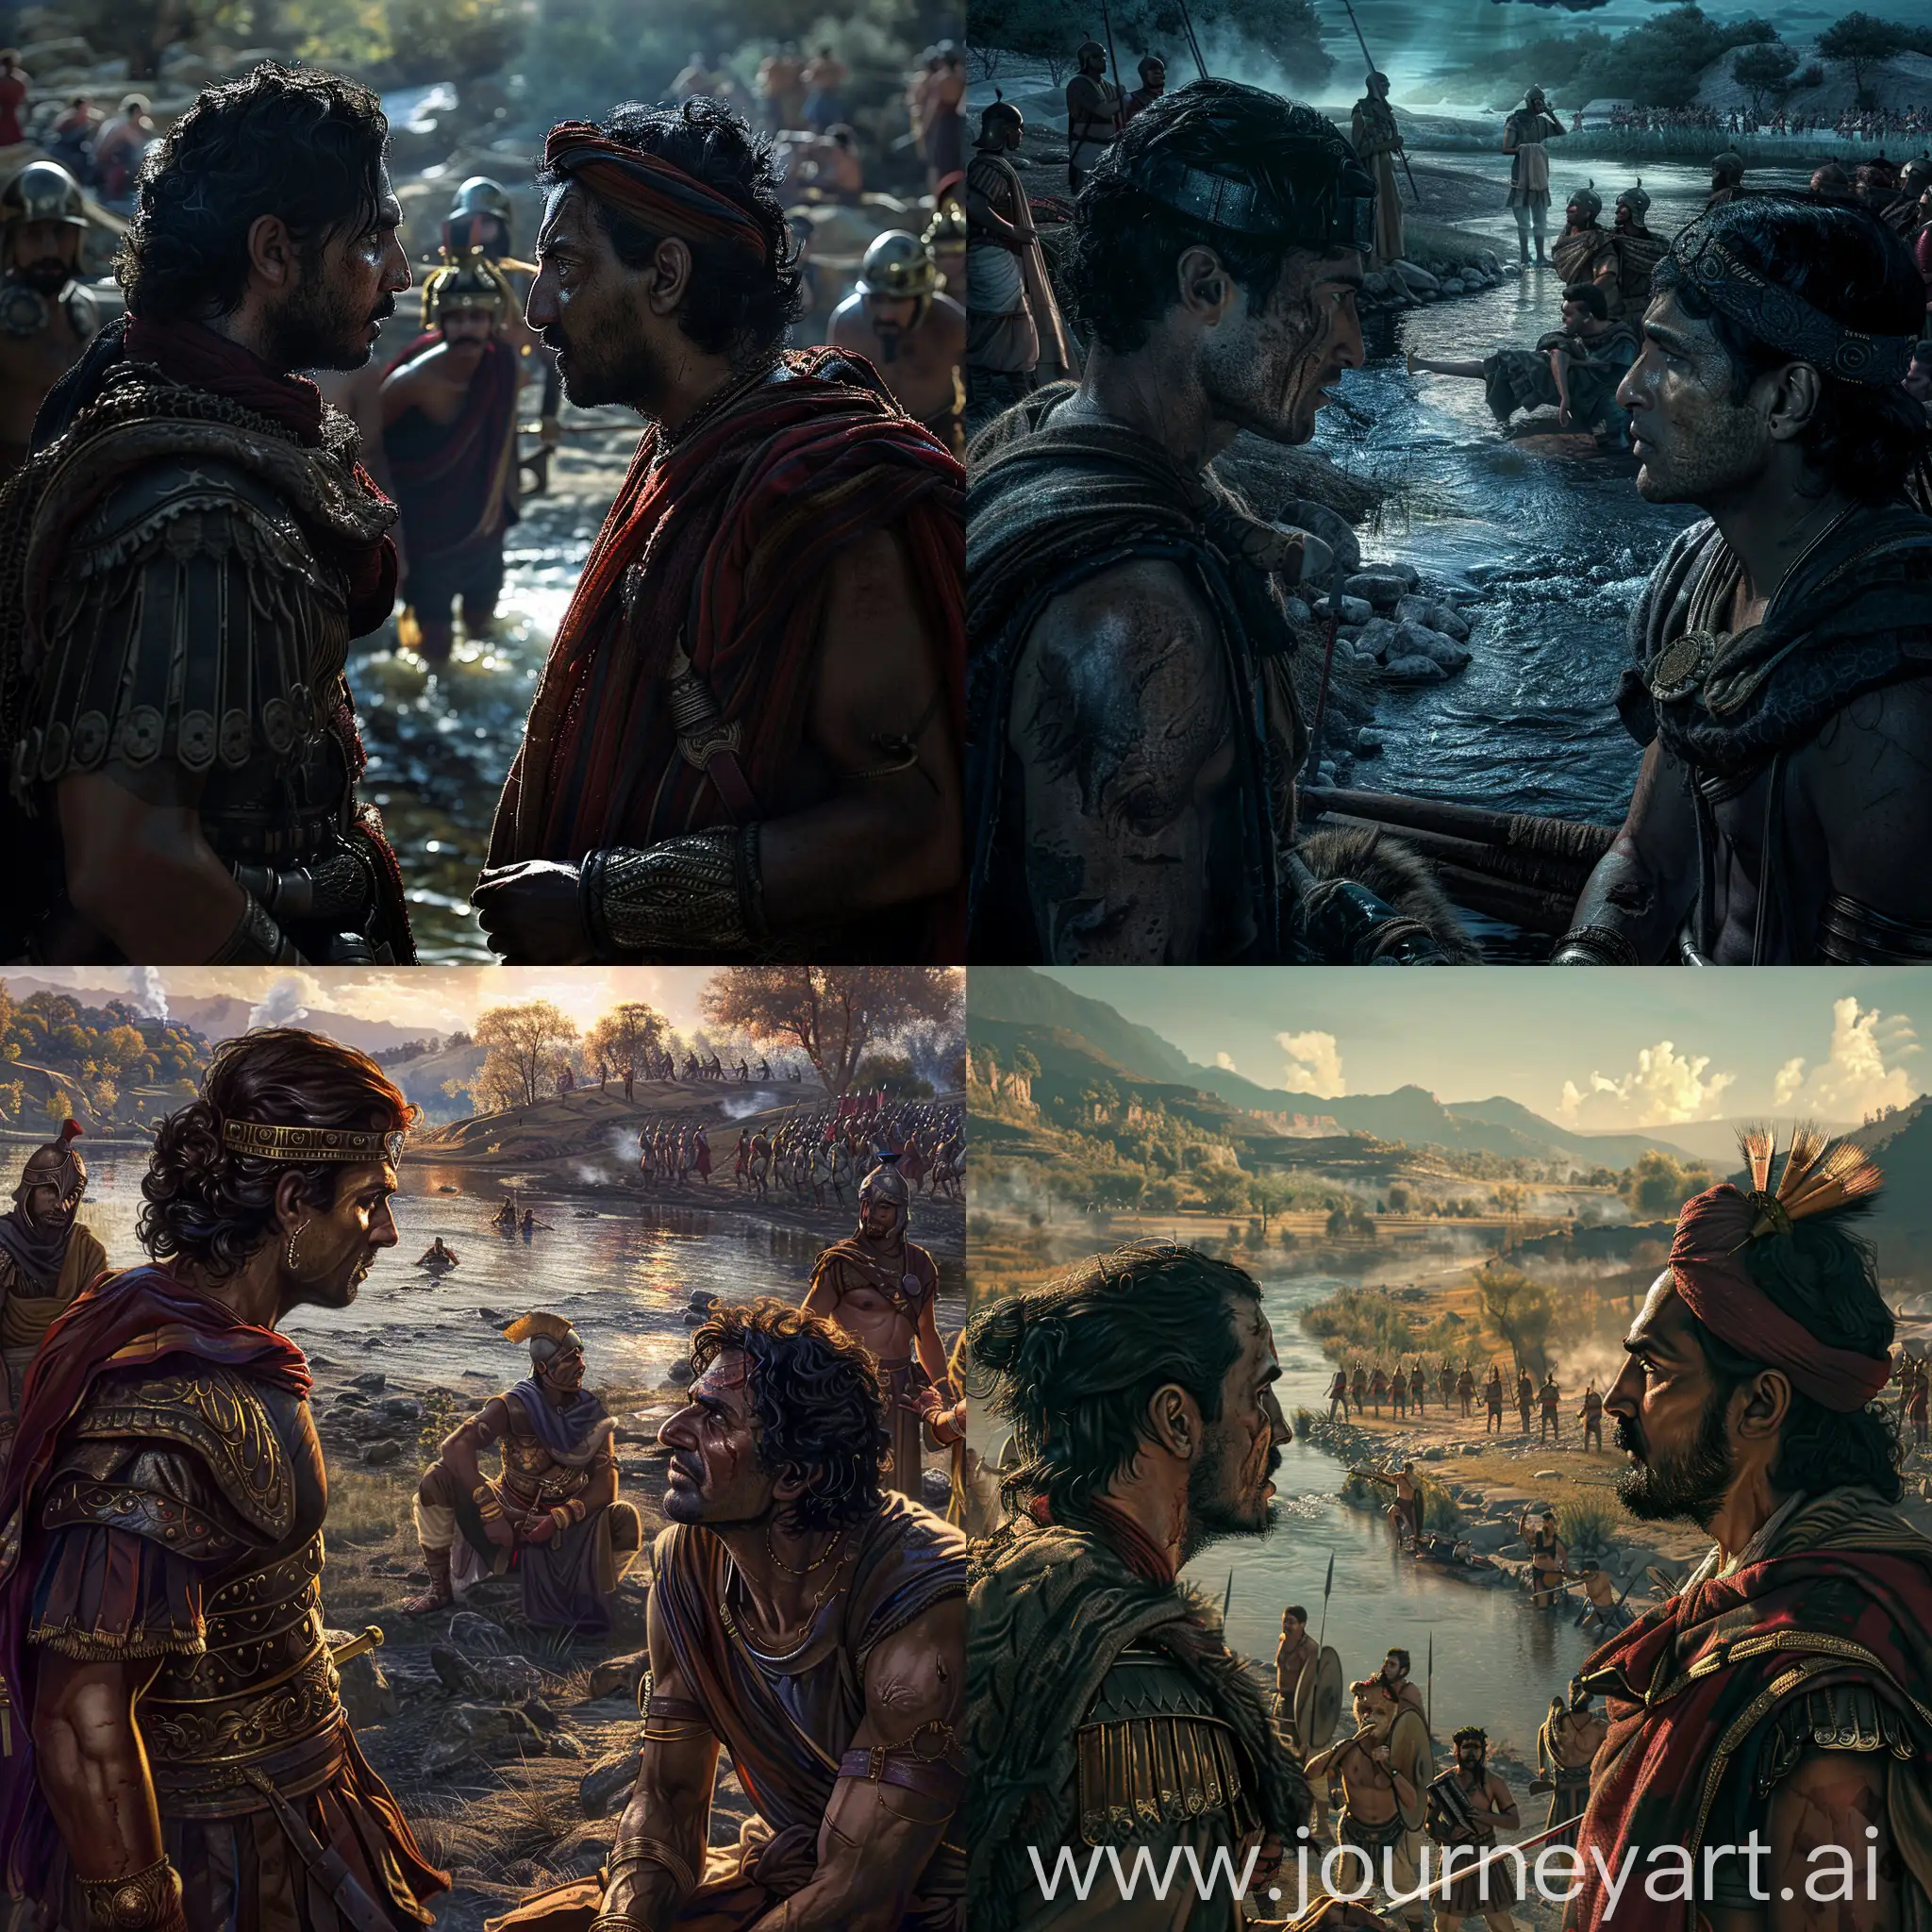 After a battle at Hydaspes near a river, Alexander the Great and Ancient Indian King Porus looking at eachother face to face, the Indian king is seem tired, Alexander the Great seem bold and brave, ancient macedon soldiers around, cinematic lighting